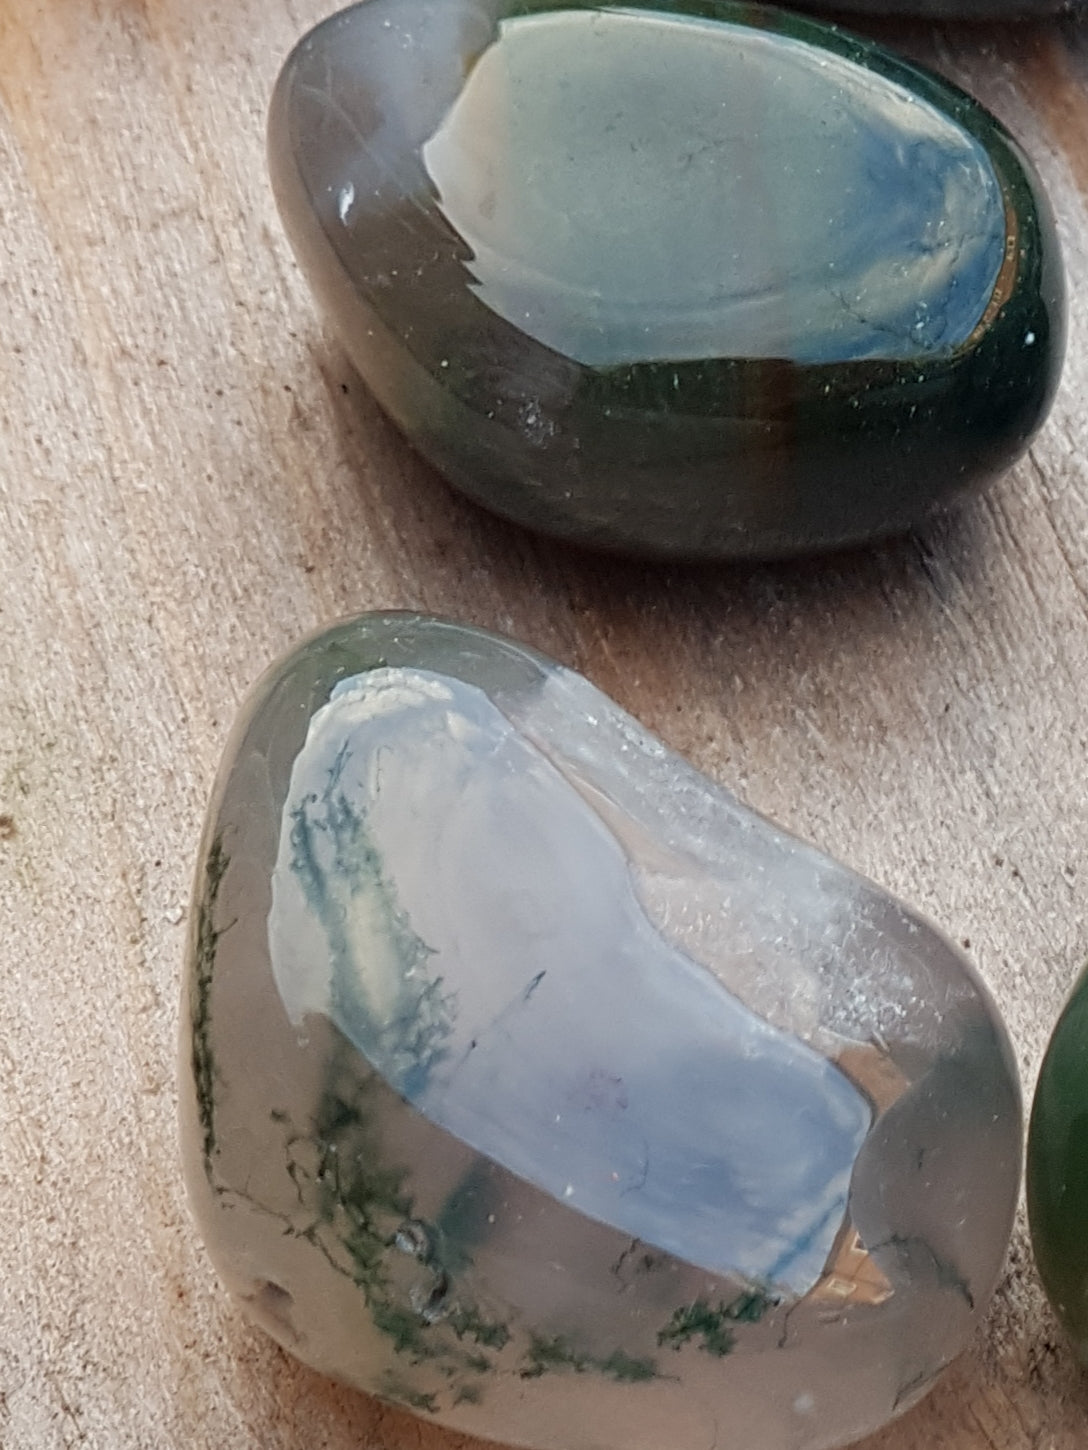 Green moss agate tumblestones. Smooth and polished. Translucent and see through. Have strands of a green material within them